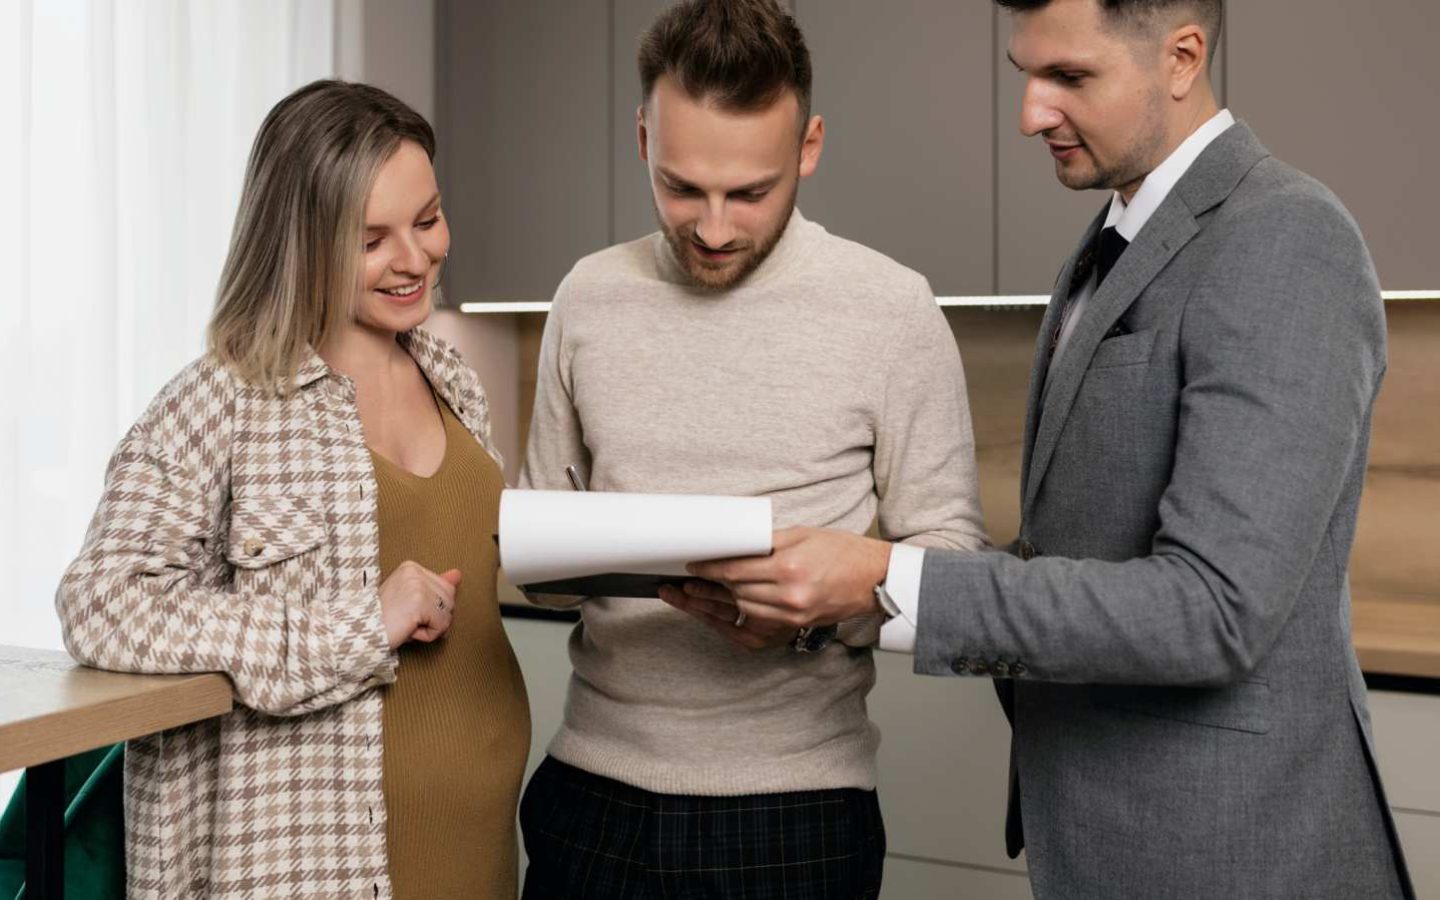 three people standing and reviewing a document